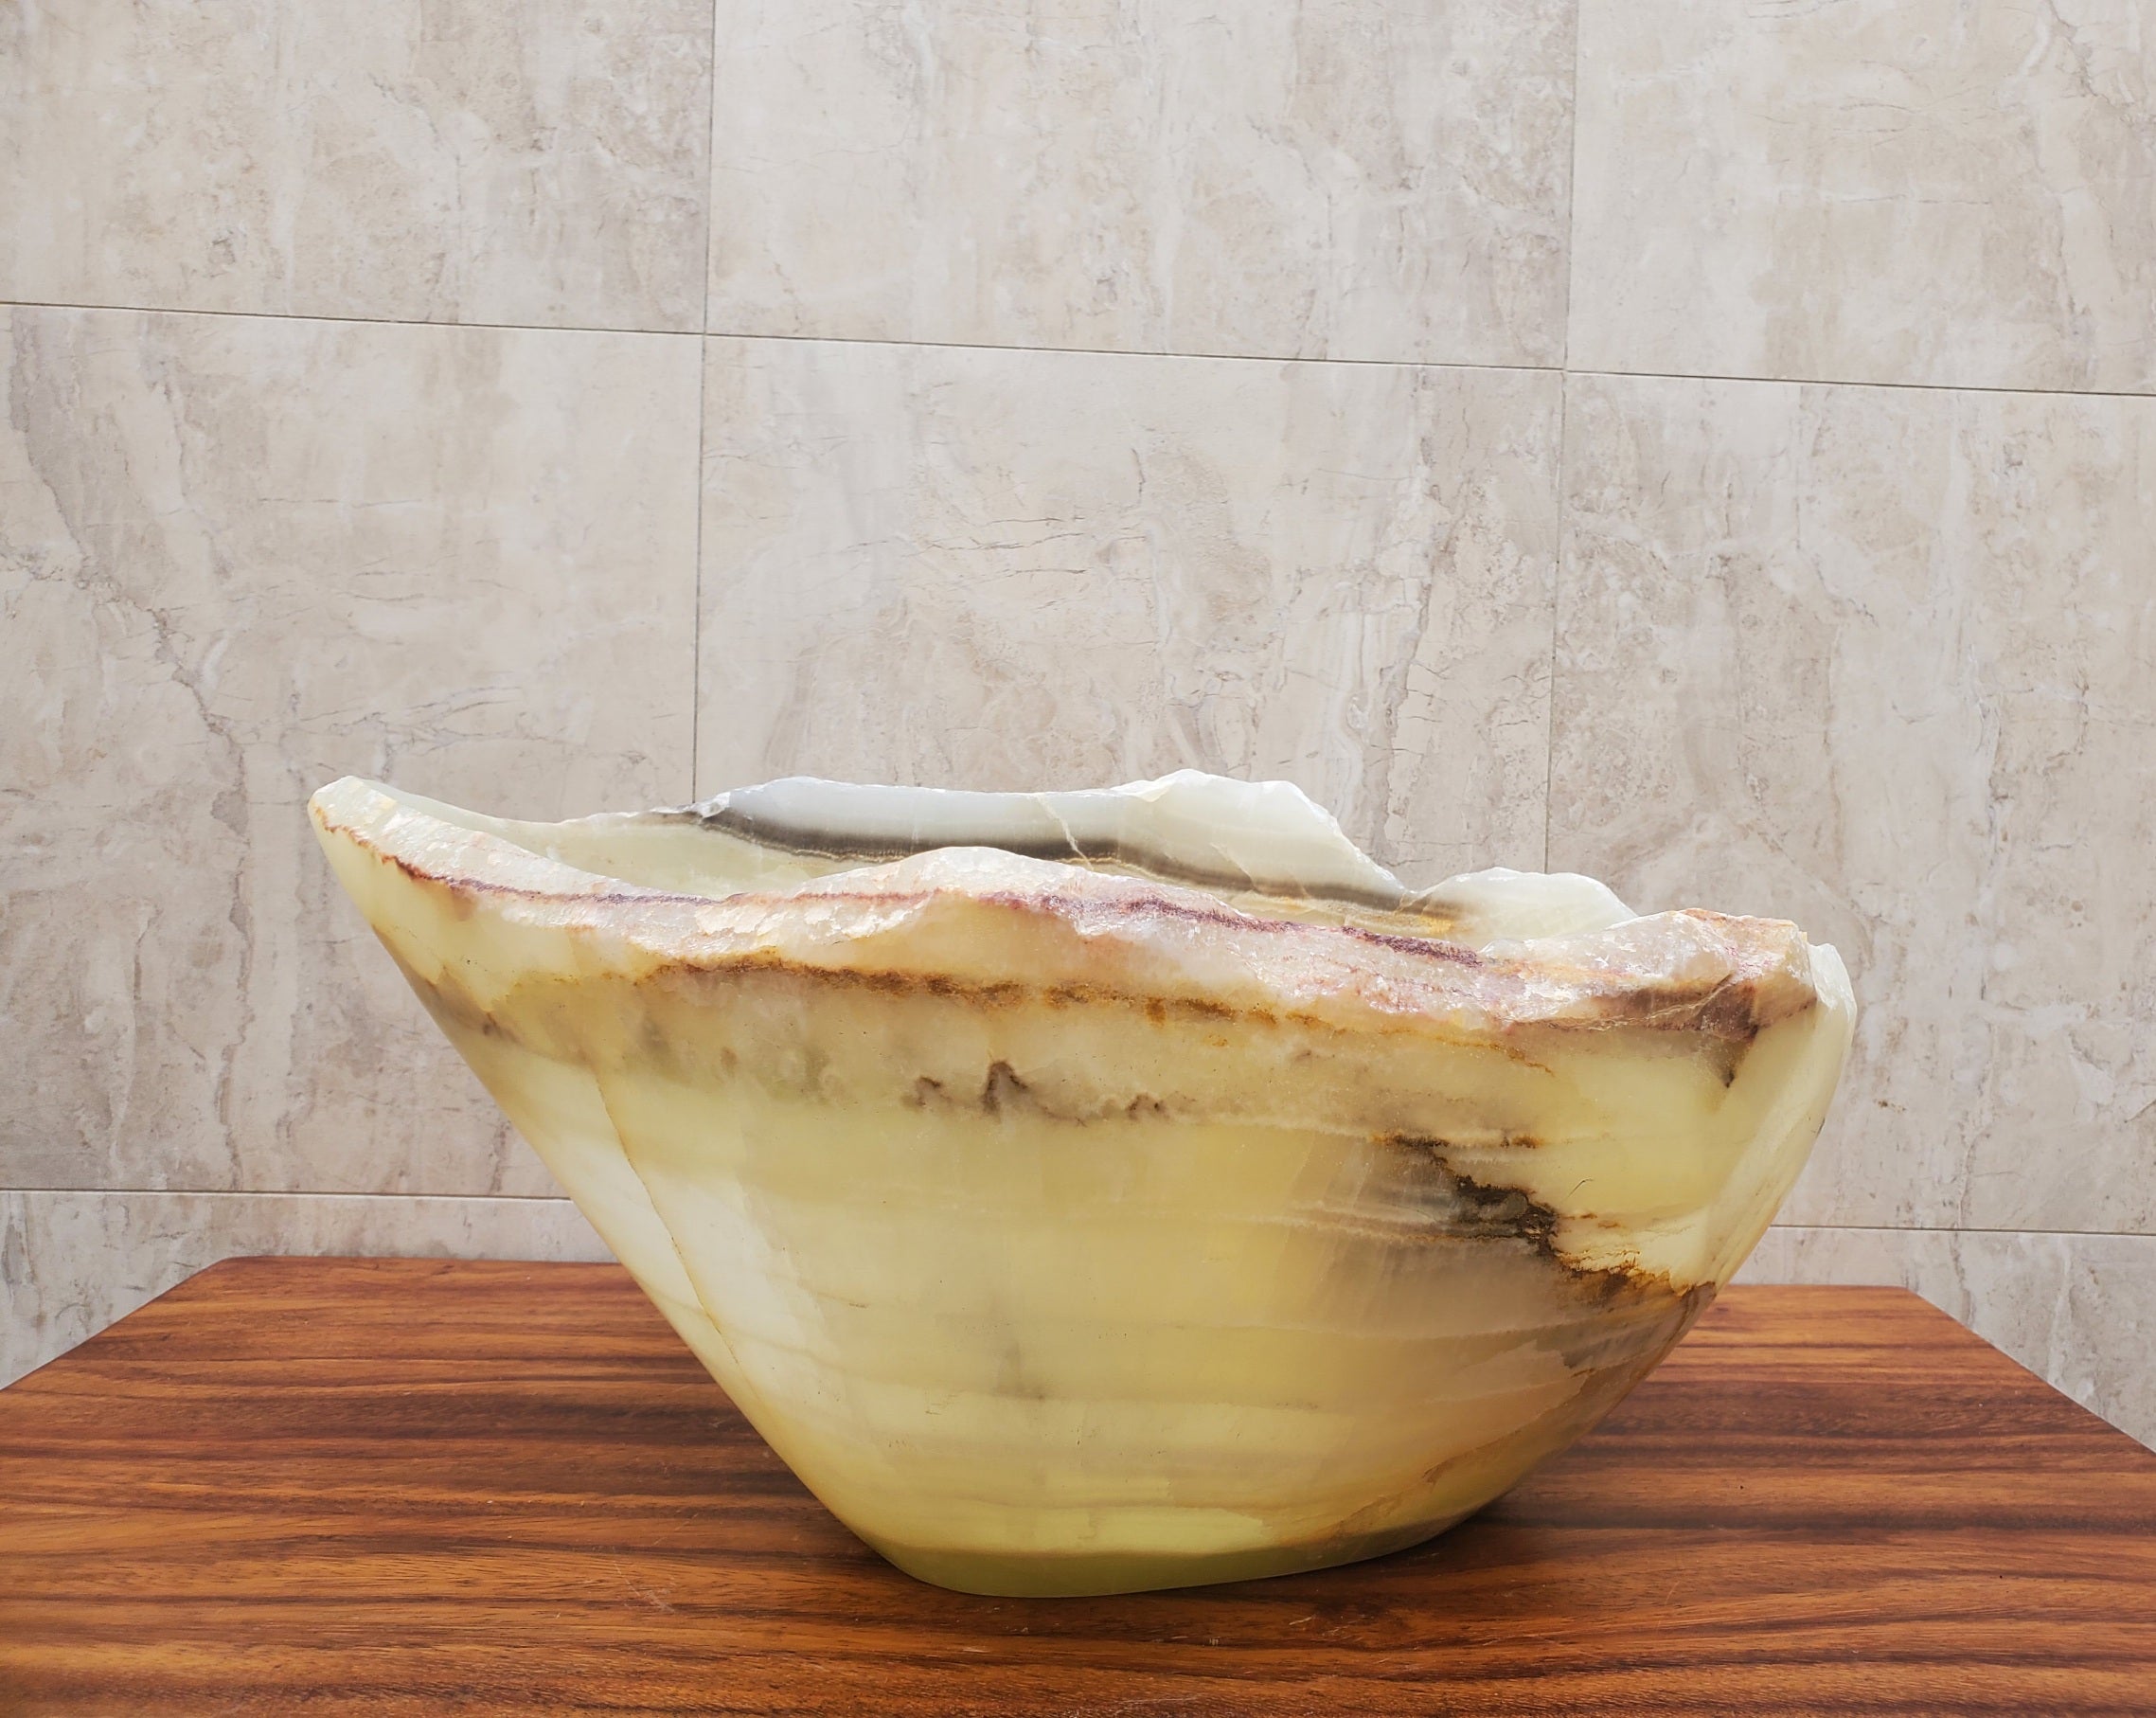 Green and White Onyx Vessel Sink. Handmade in Mexico. Hand-finished and ships from the USA. Buy now at www.felipeandgrace.com. 